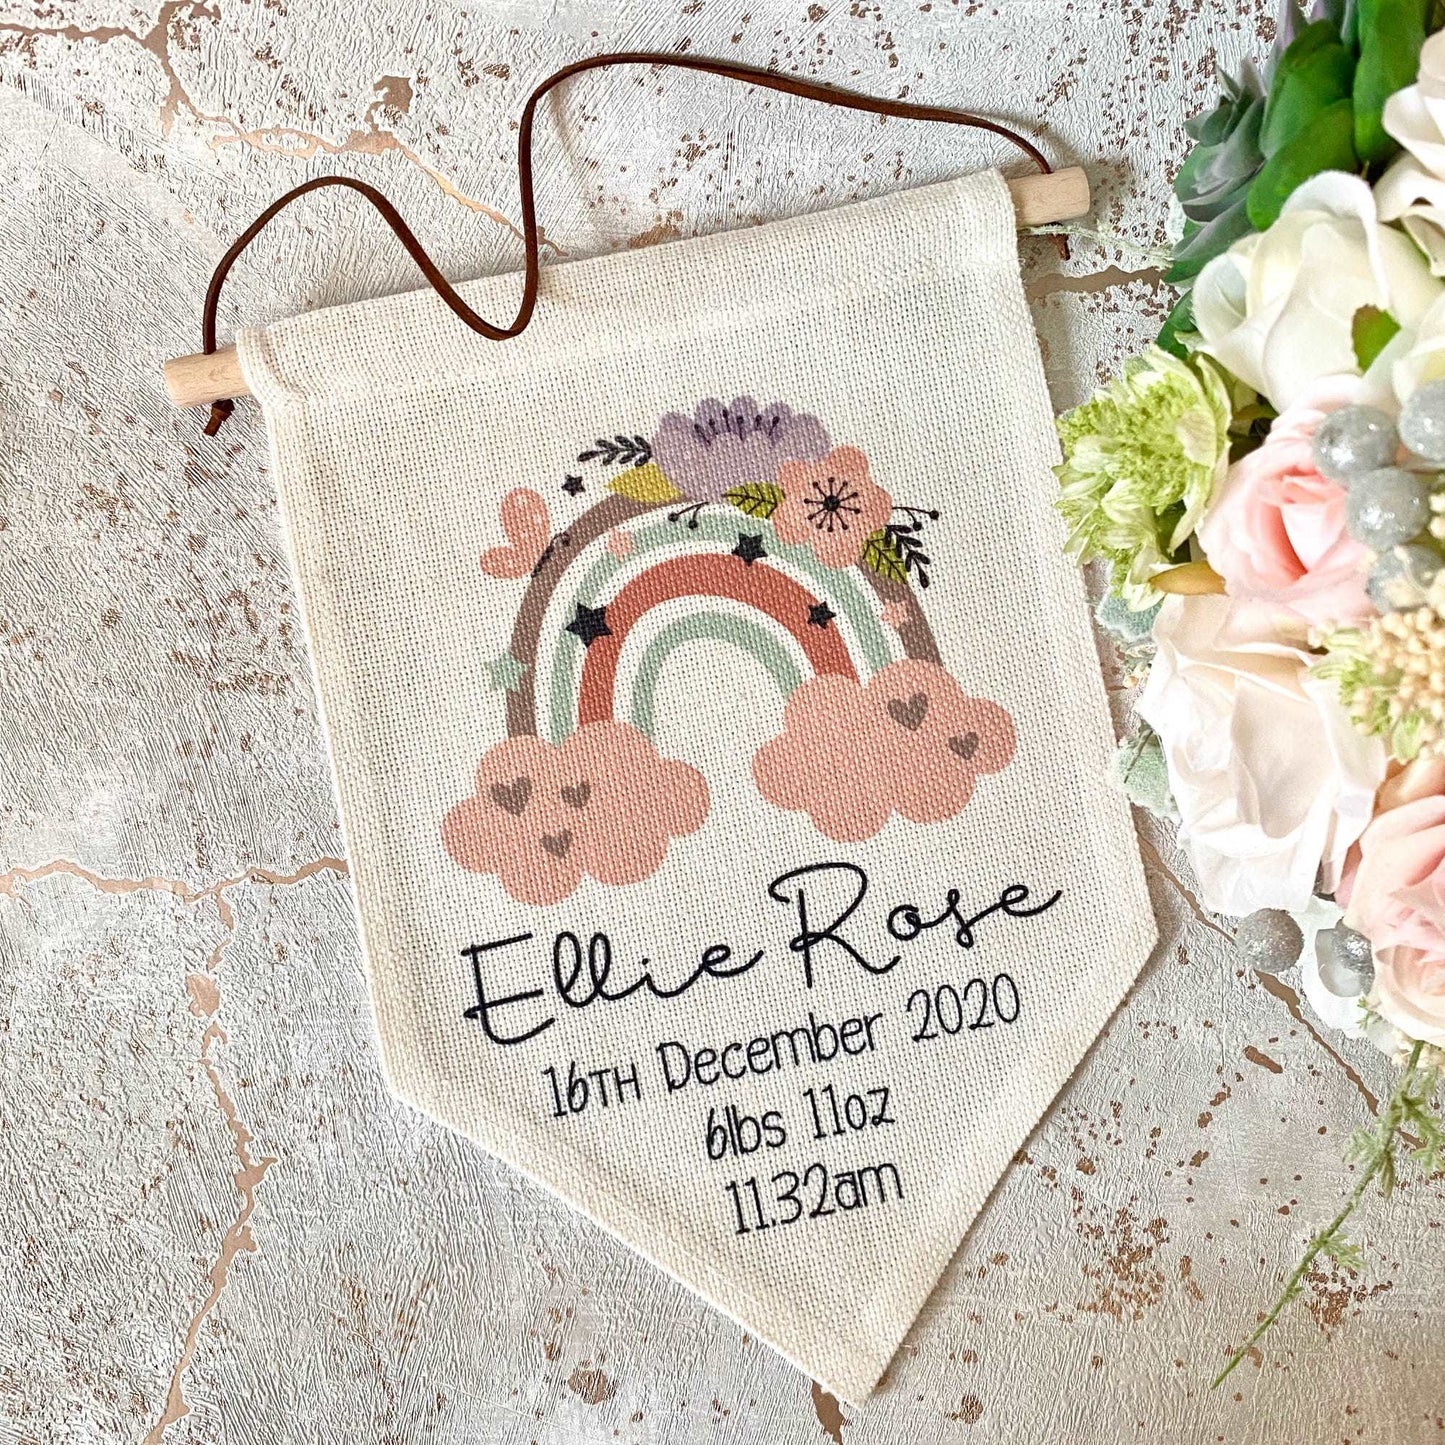 linen flag with floral rainbow design printed on with a name and birth details below